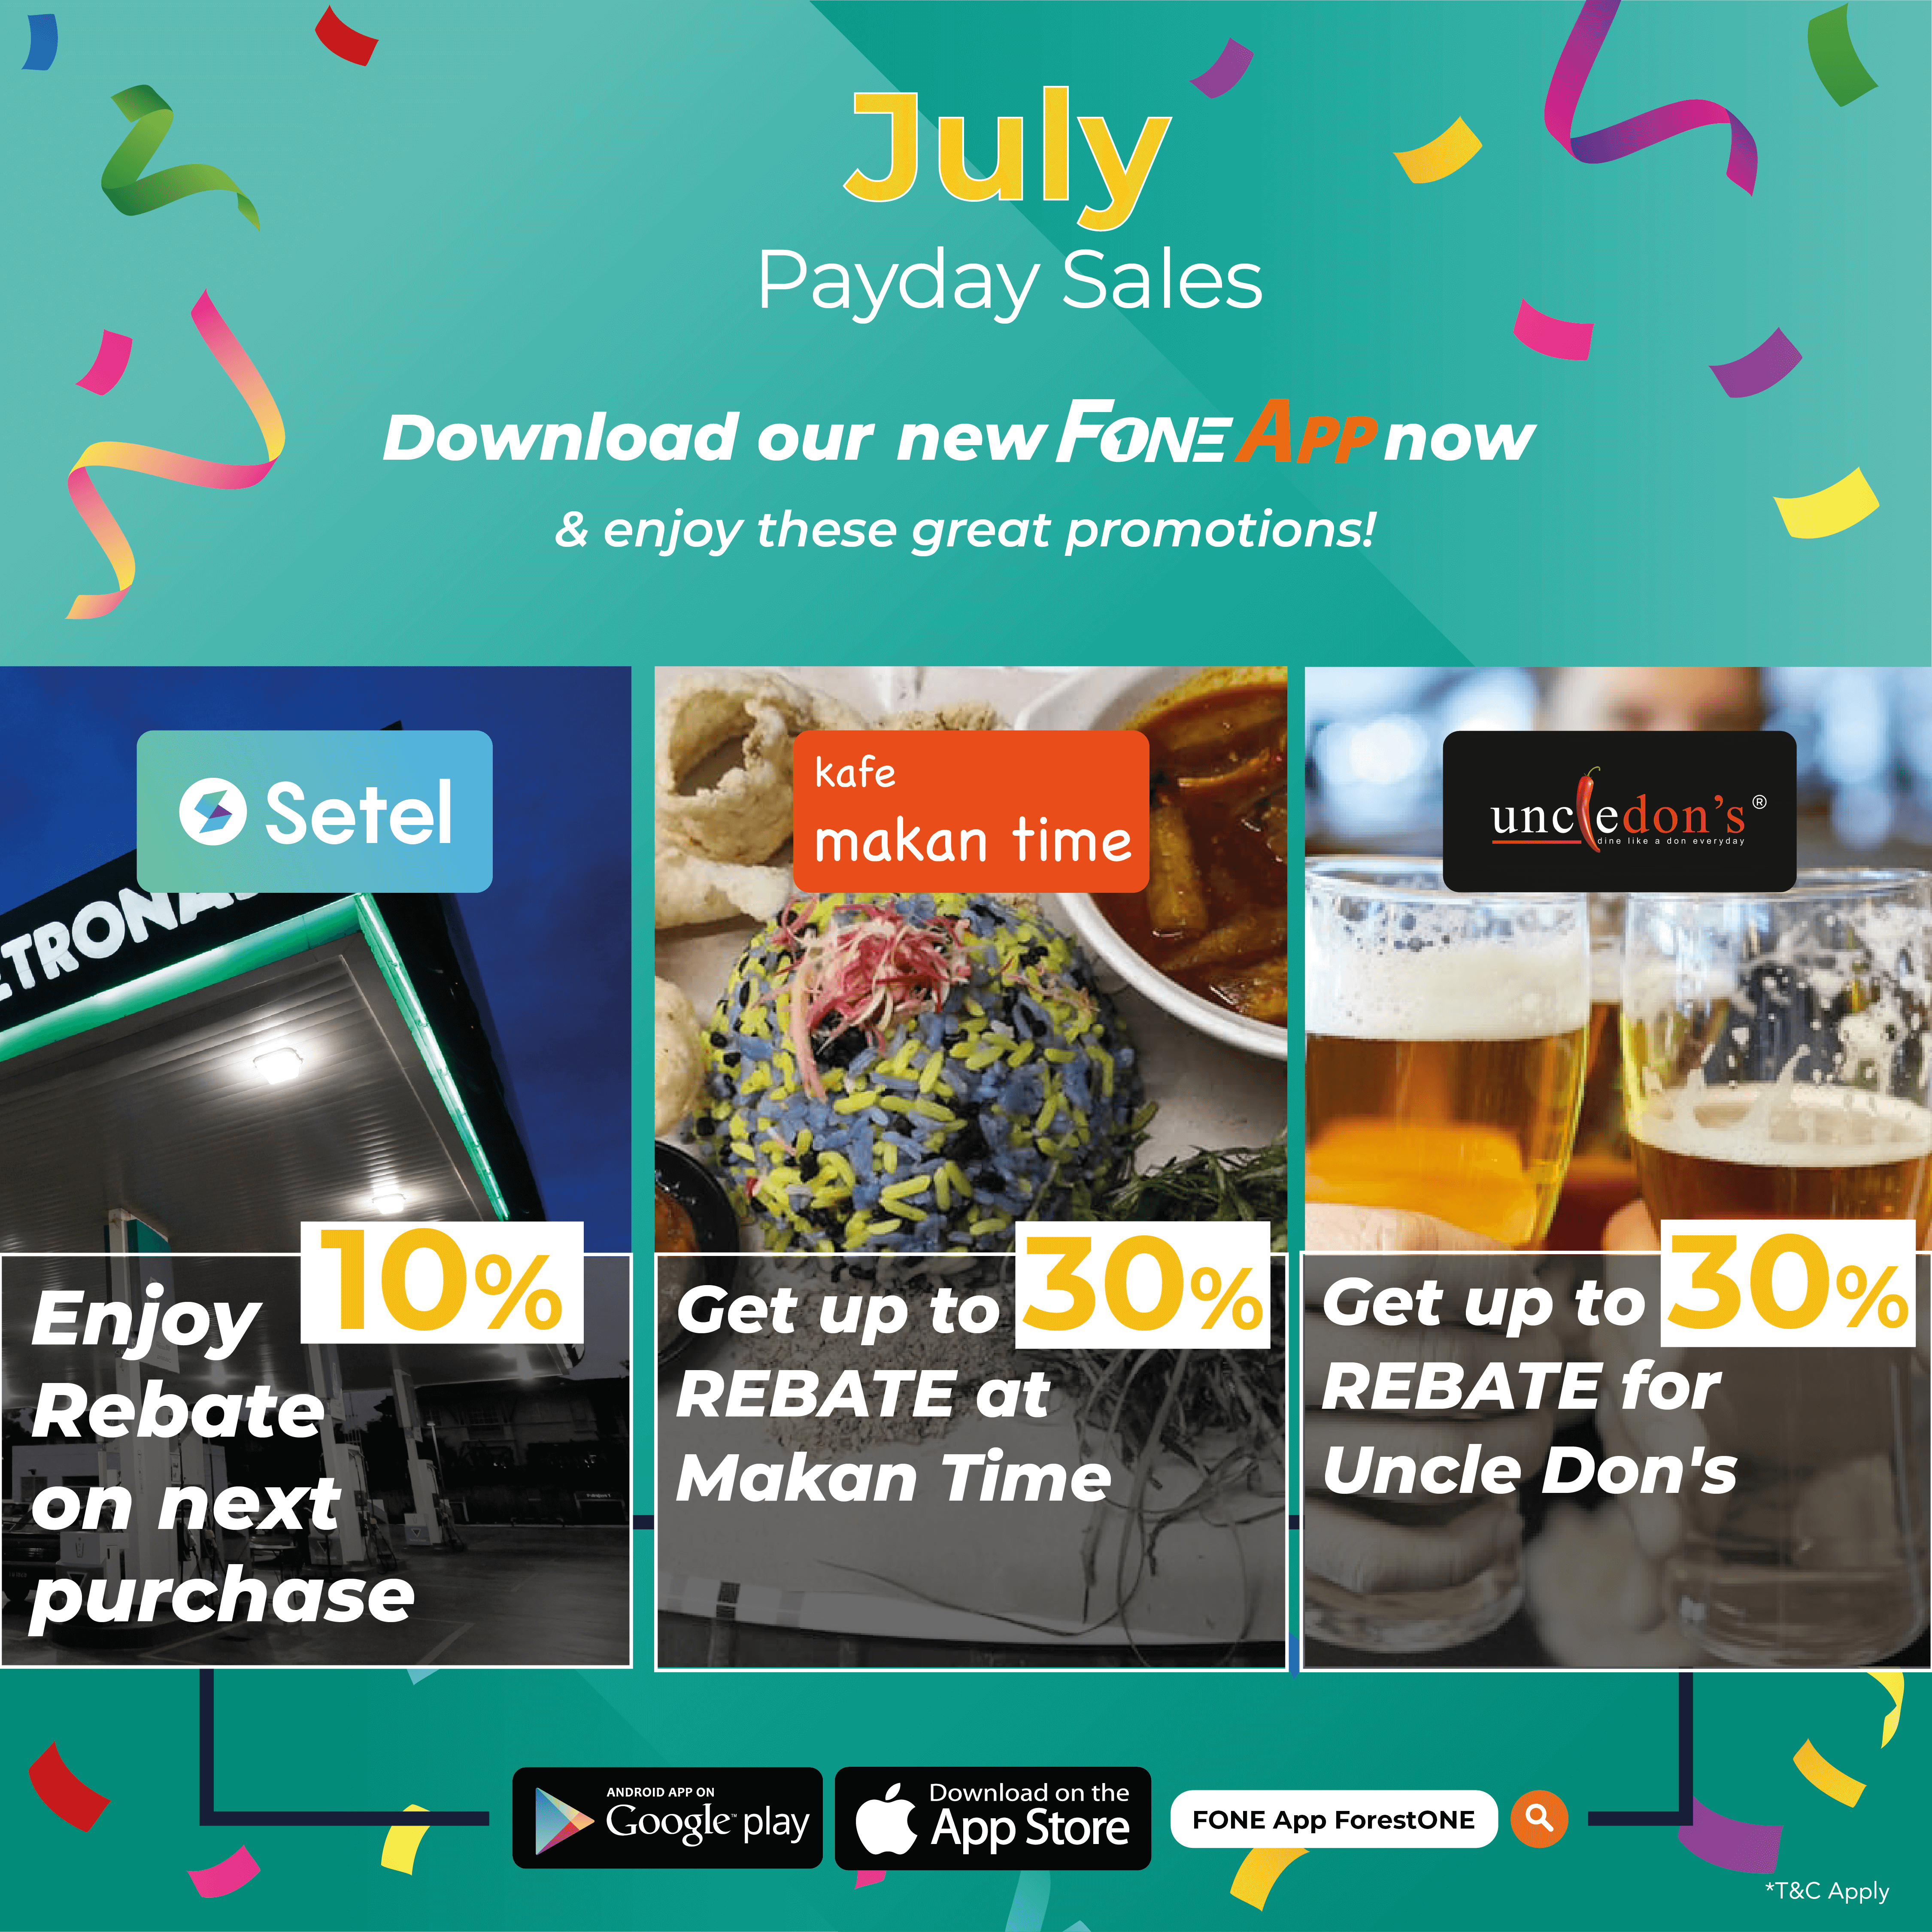 July Payday Sales Is Here!